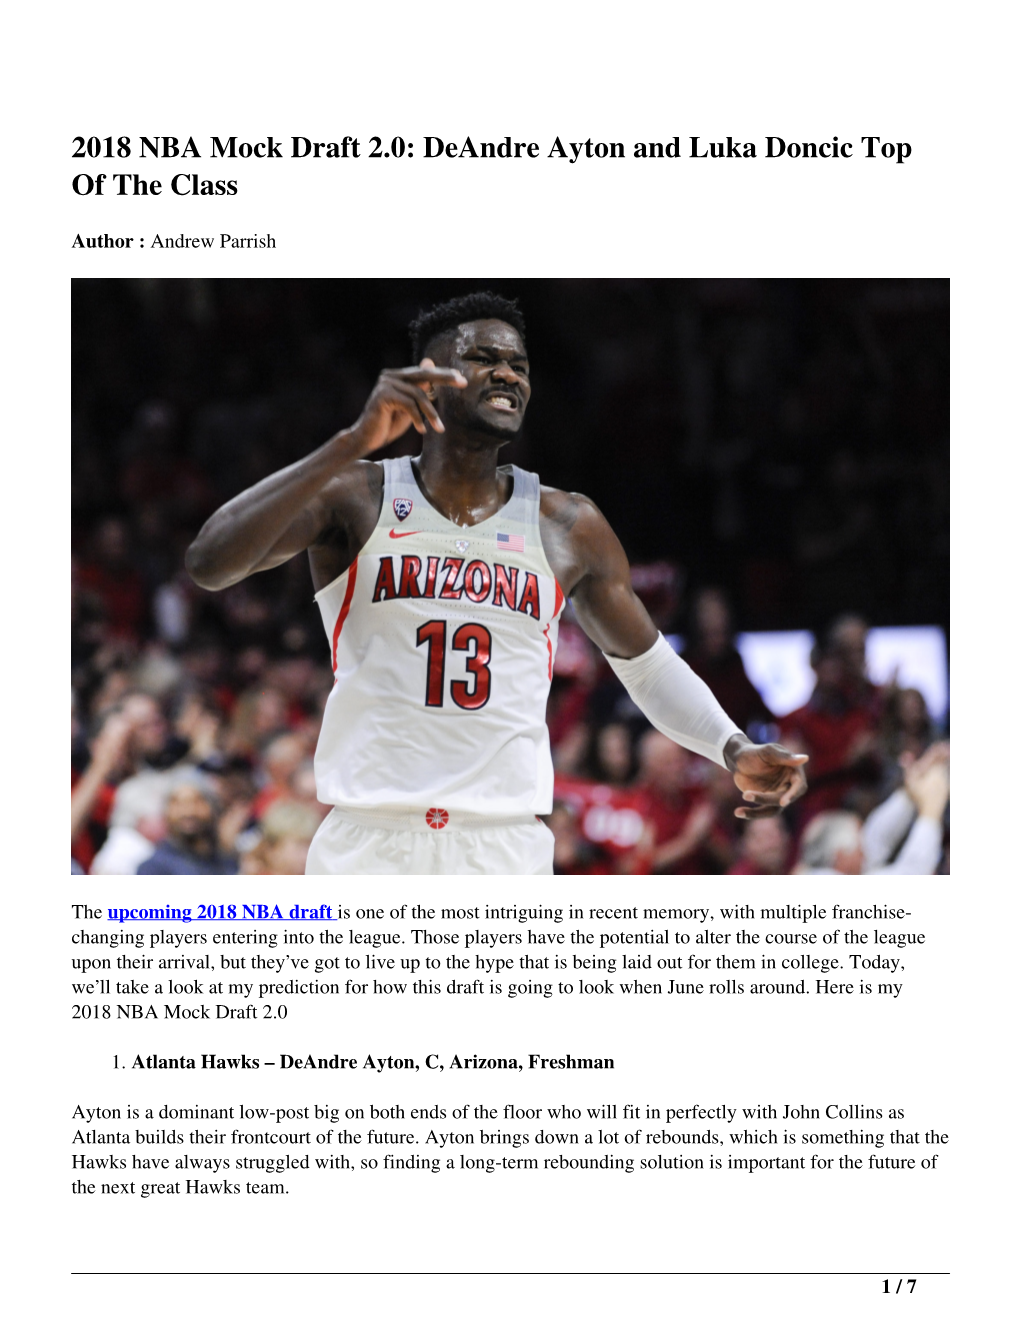 2018 NBA Mock Draft 2.0: Deandre Ayton and Luka Doncic Top of the Class